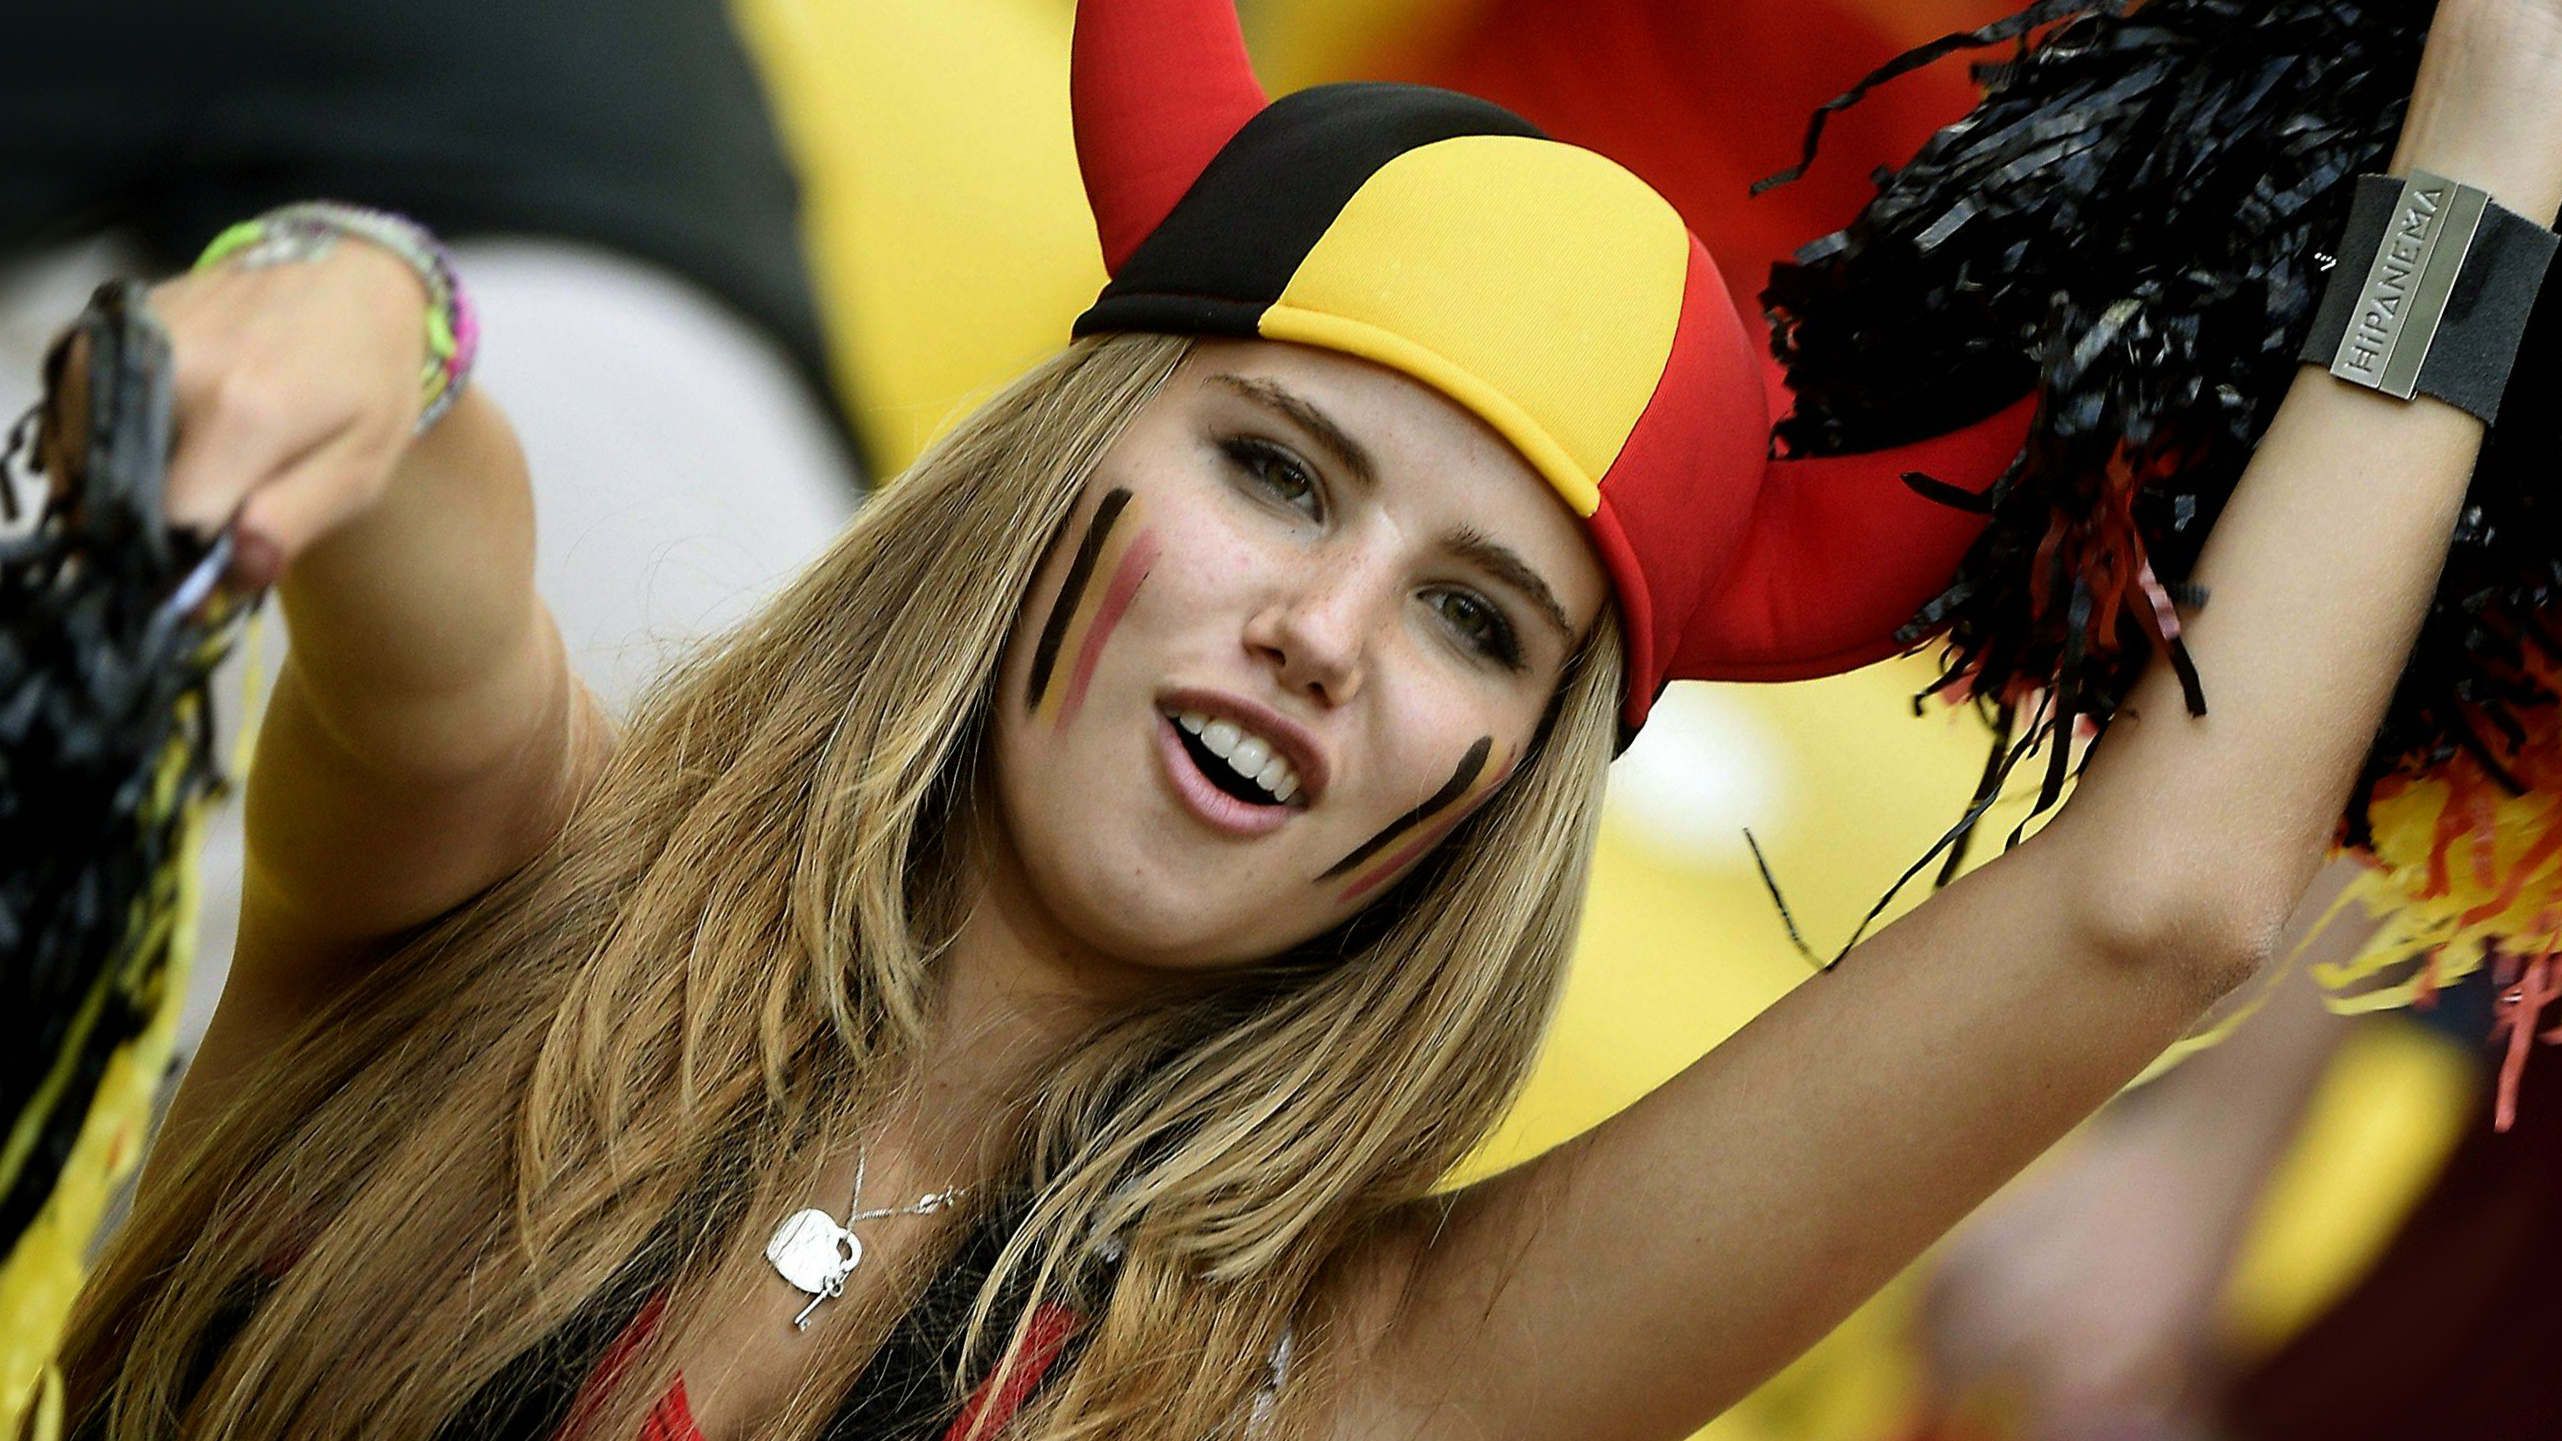 People 2562x1441 Axelle Despiegelaere FIFA World Cup women Belgium necklace hat women with hats funny hats long hair blonde open mouth arms up belgian women